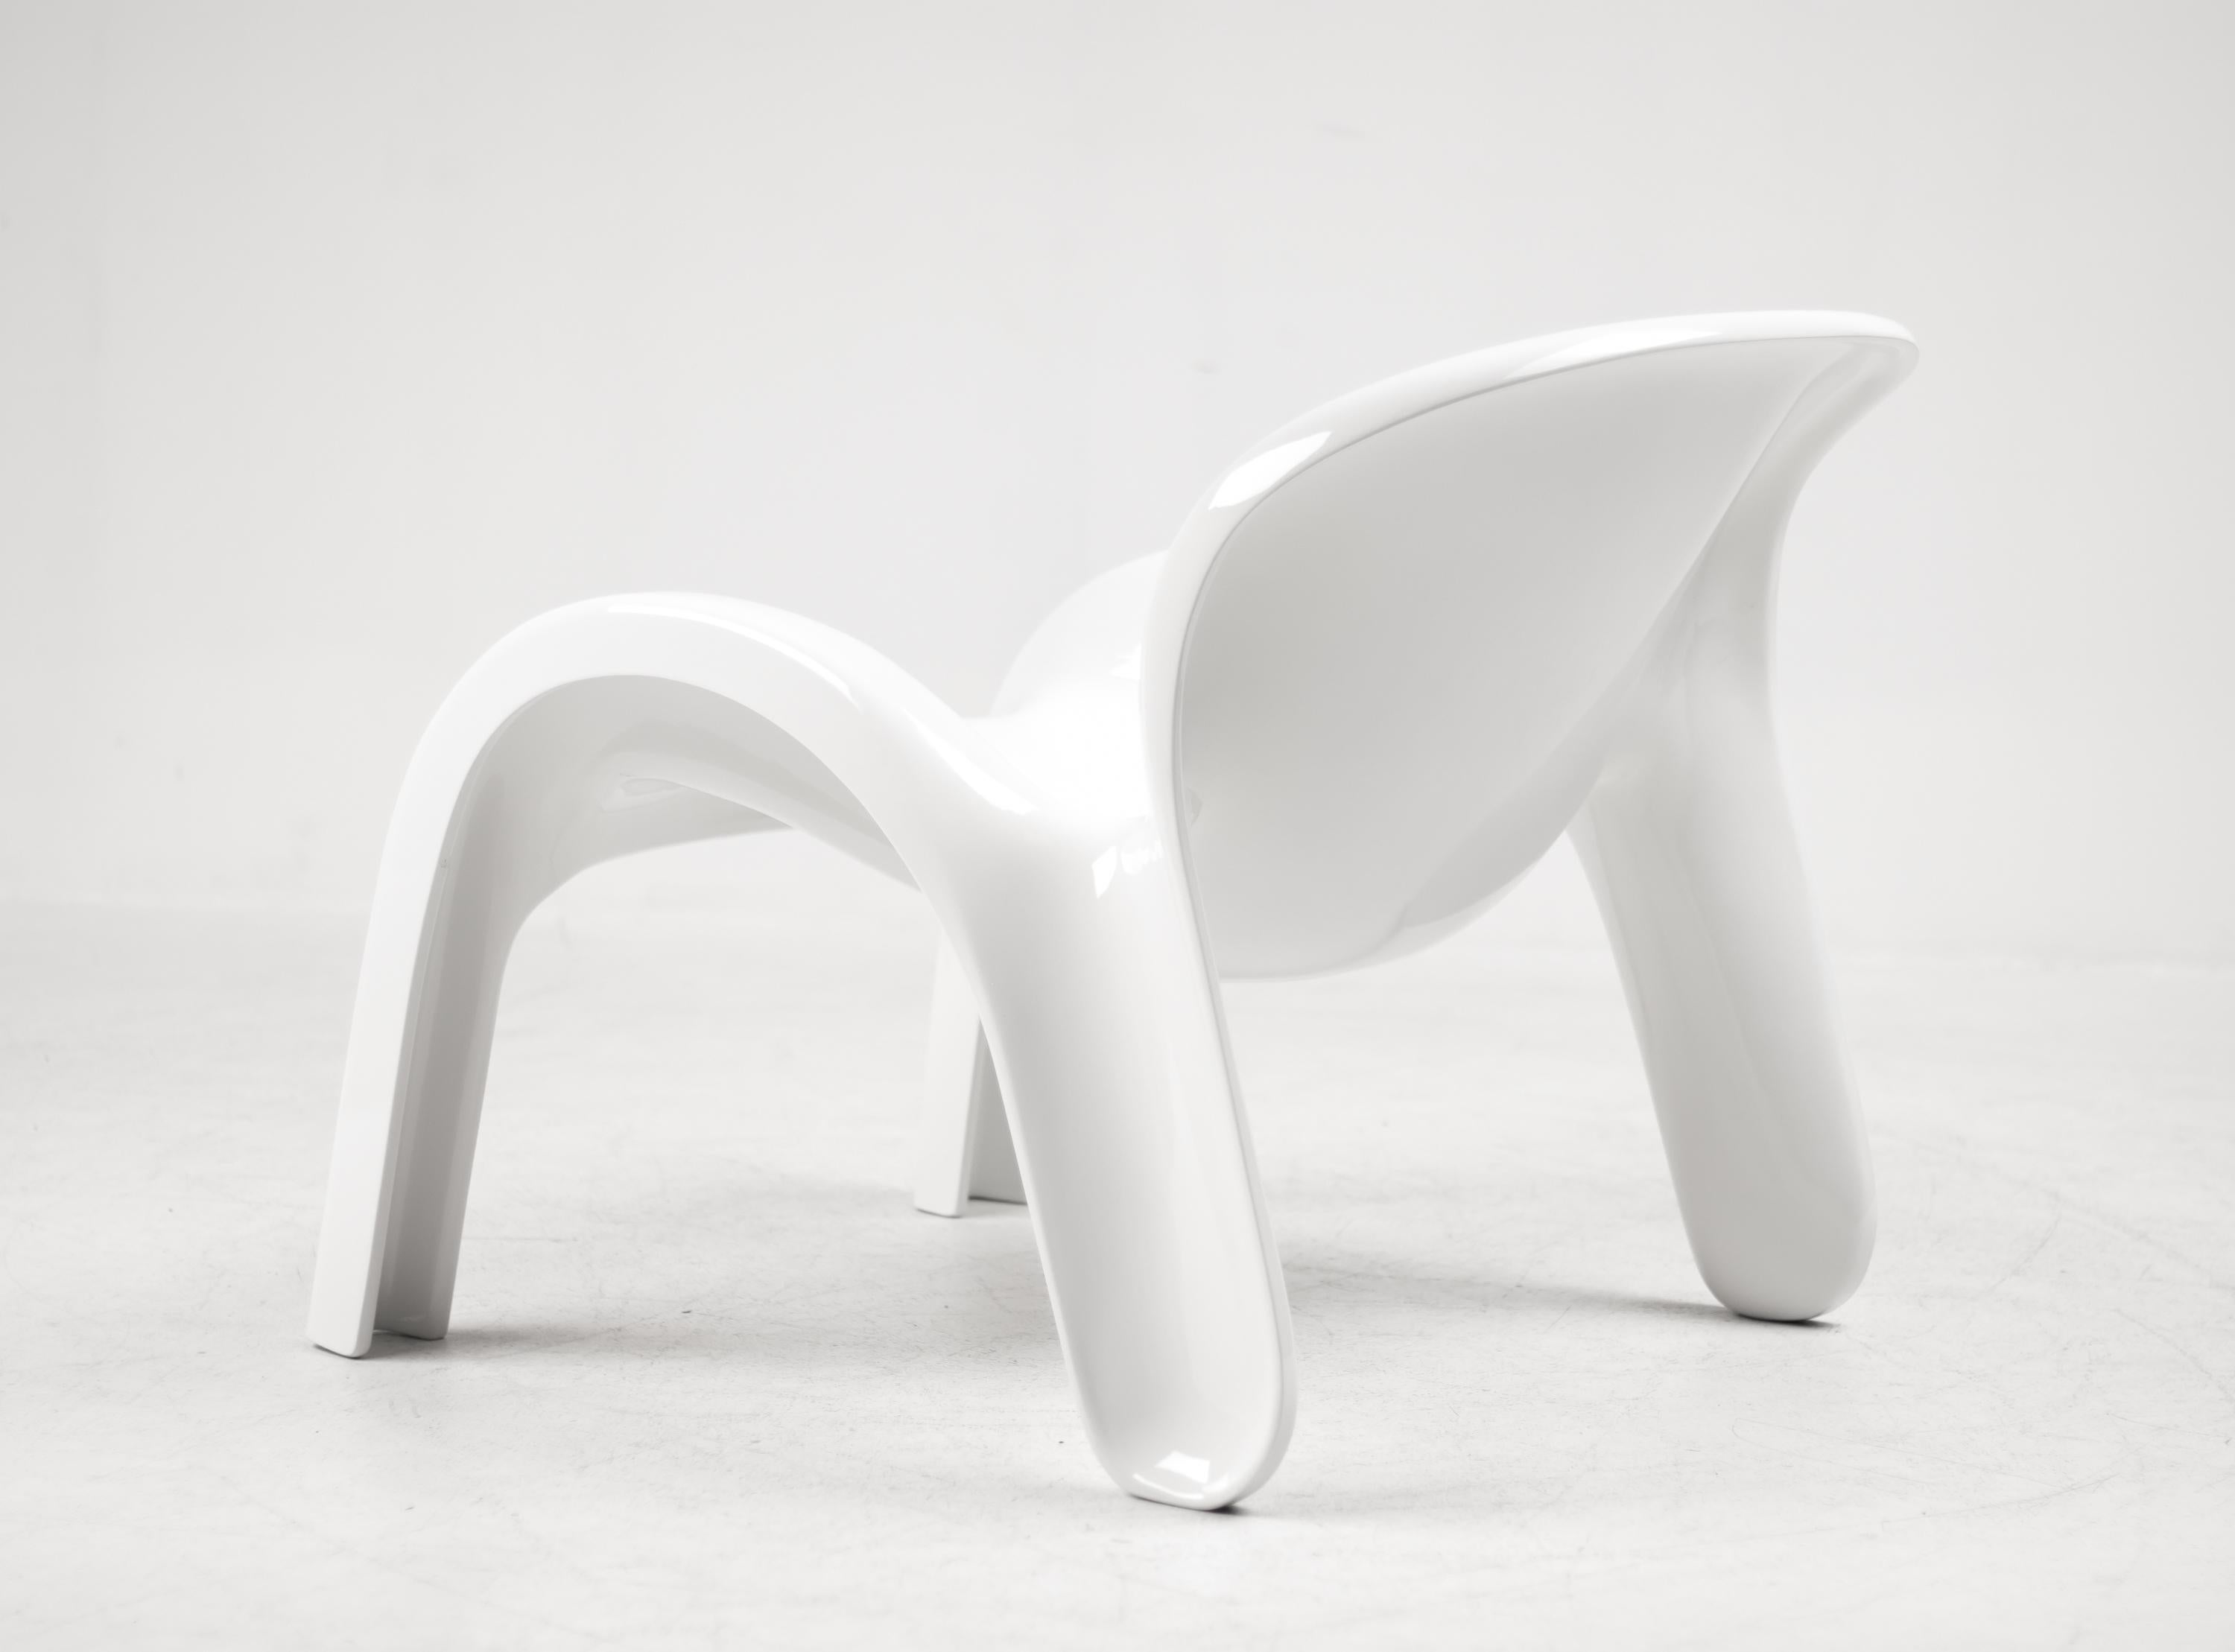 GN2 moulded fiberglass lounge chair designed by Peter Ghyczy for Reuter's Form and life collection, Germany, 1970.
This sculptural chair provides comfortable seating and is suitable for outdoor use.
Excellent condition!